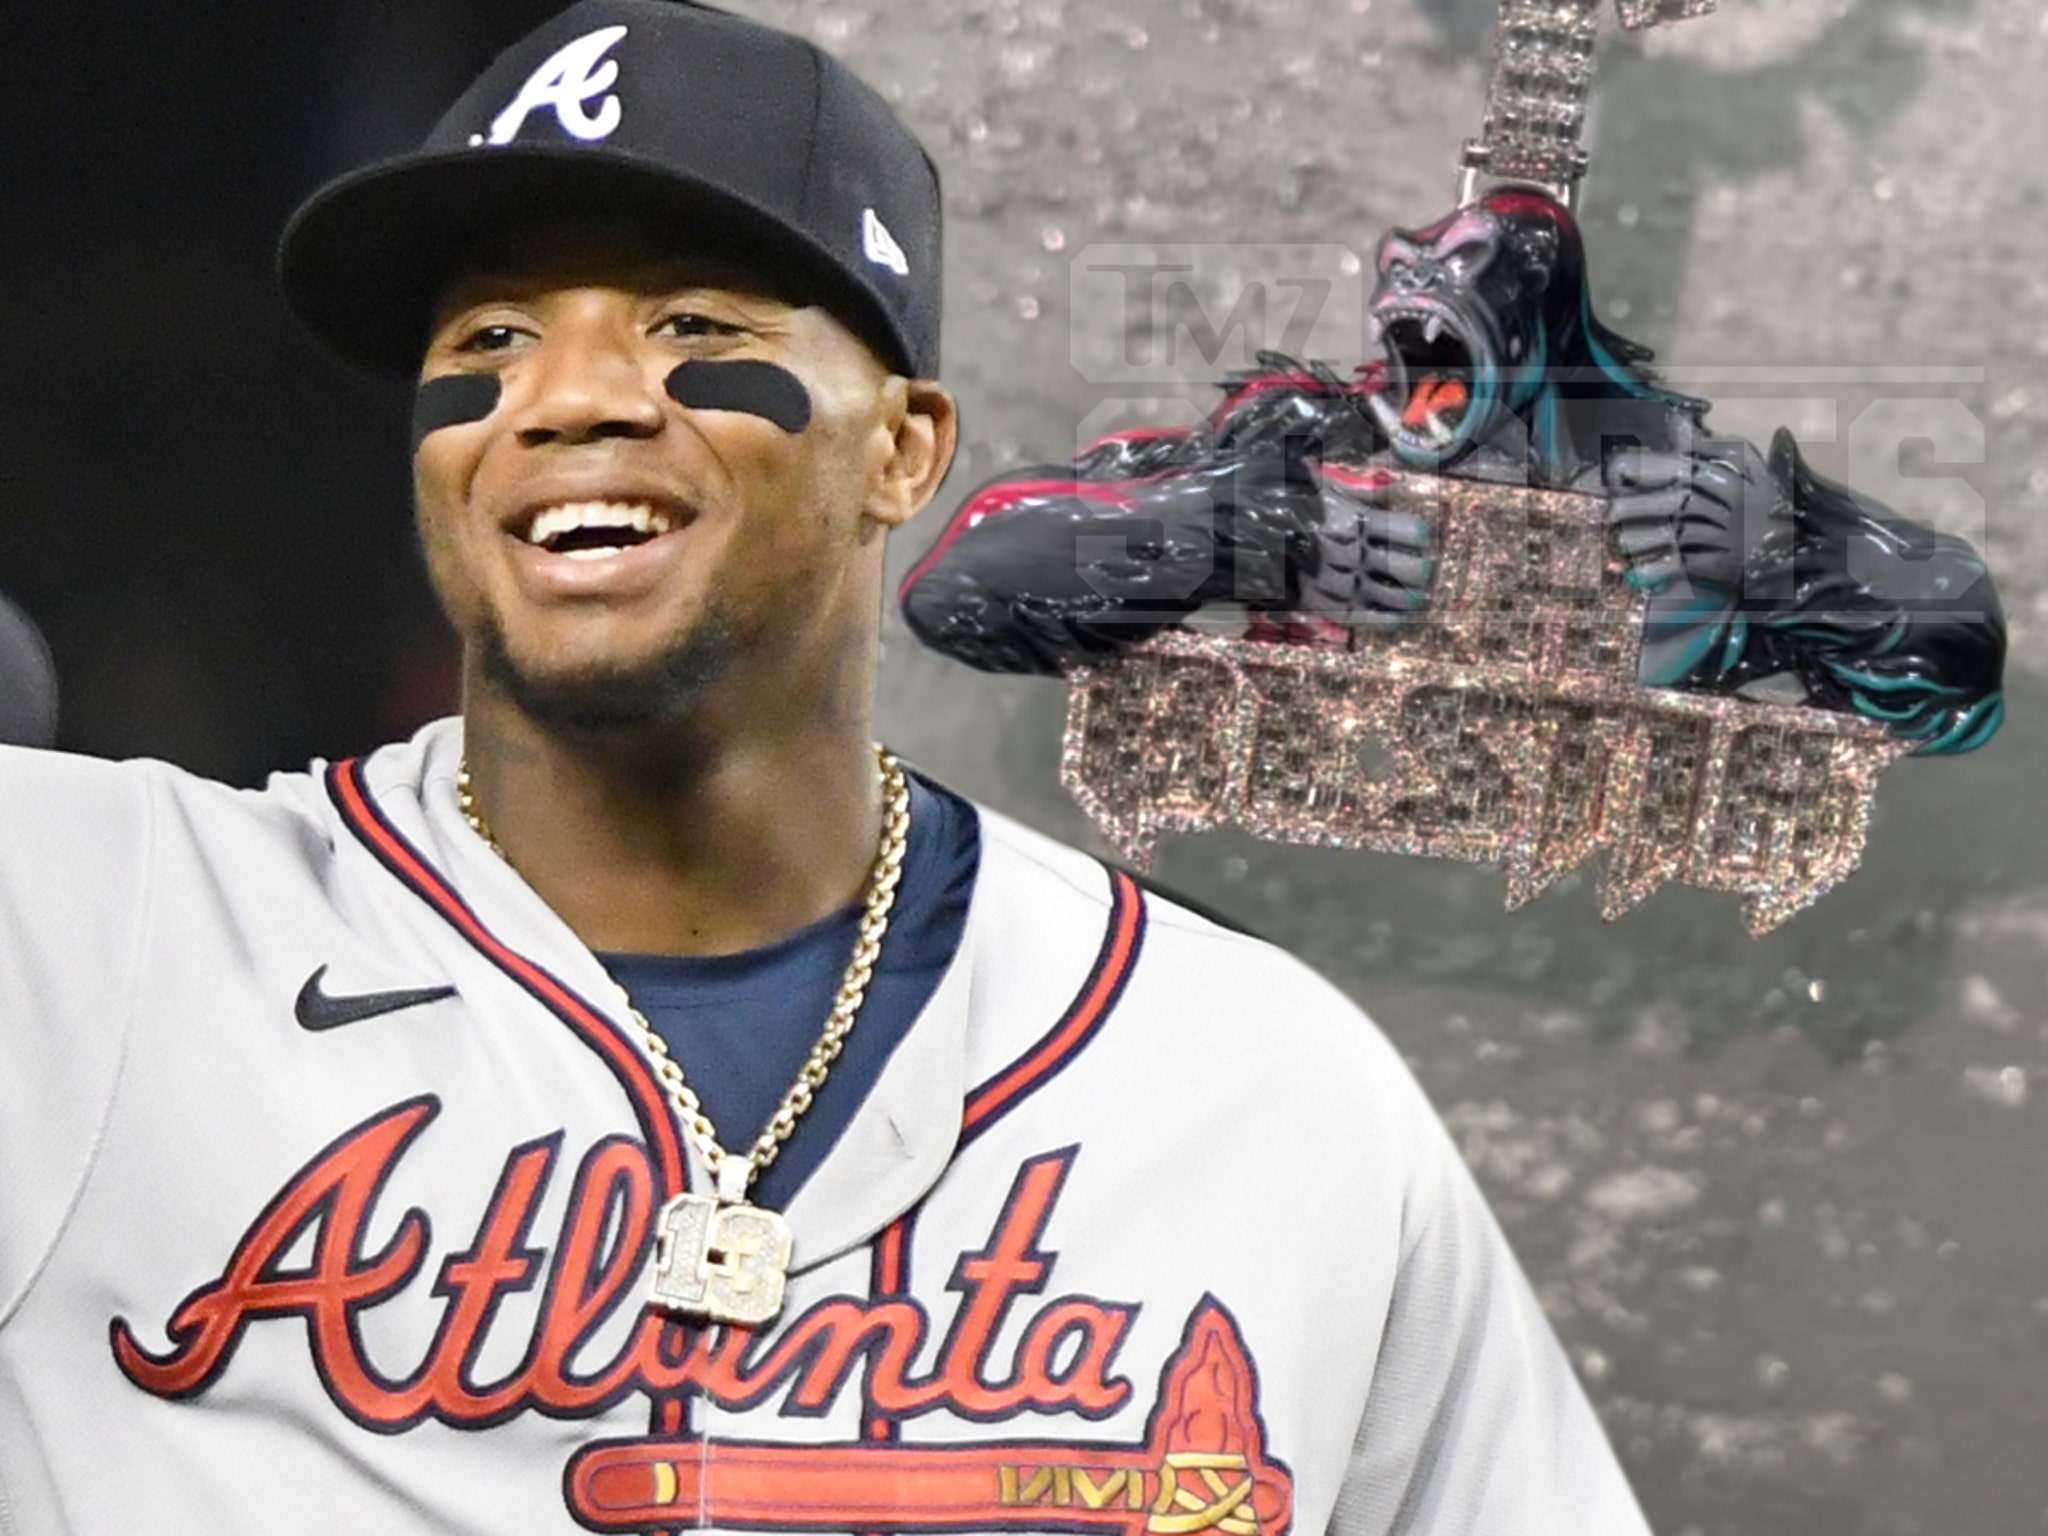 Keep an eye out for Ronald Acuna Jr. (@ronaldacunajr13) and his